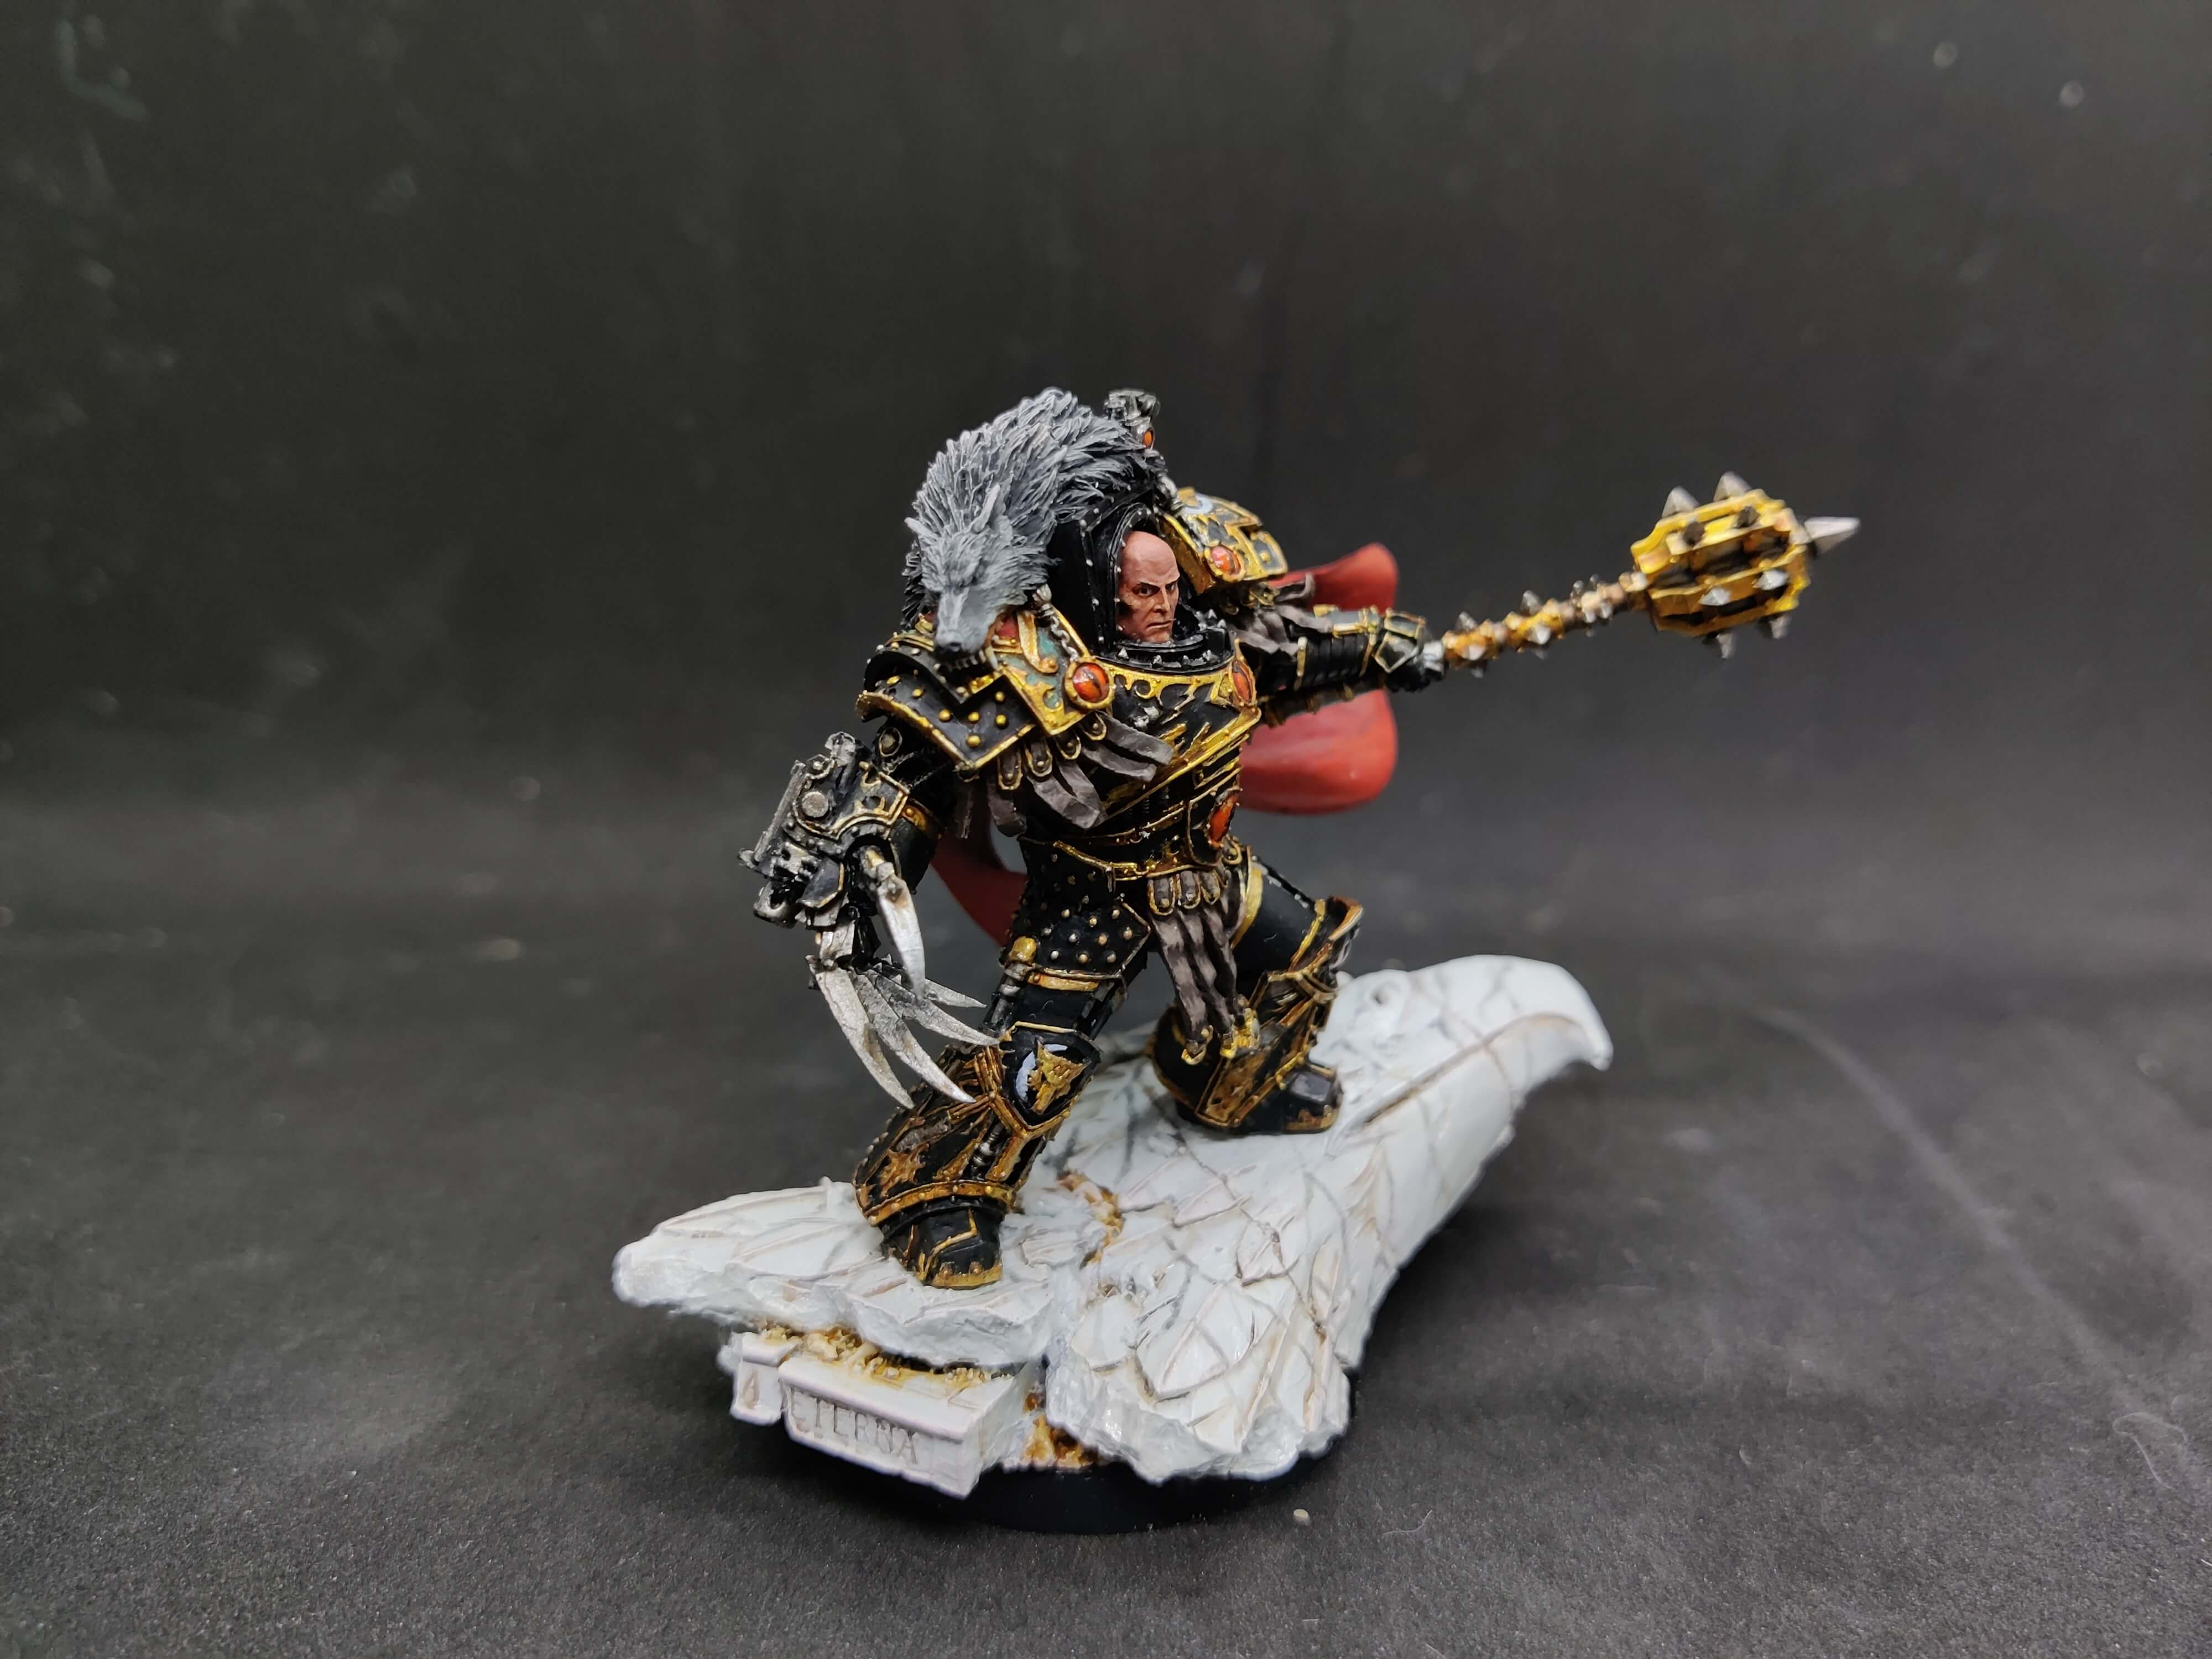 I painted Horus the Warmaster